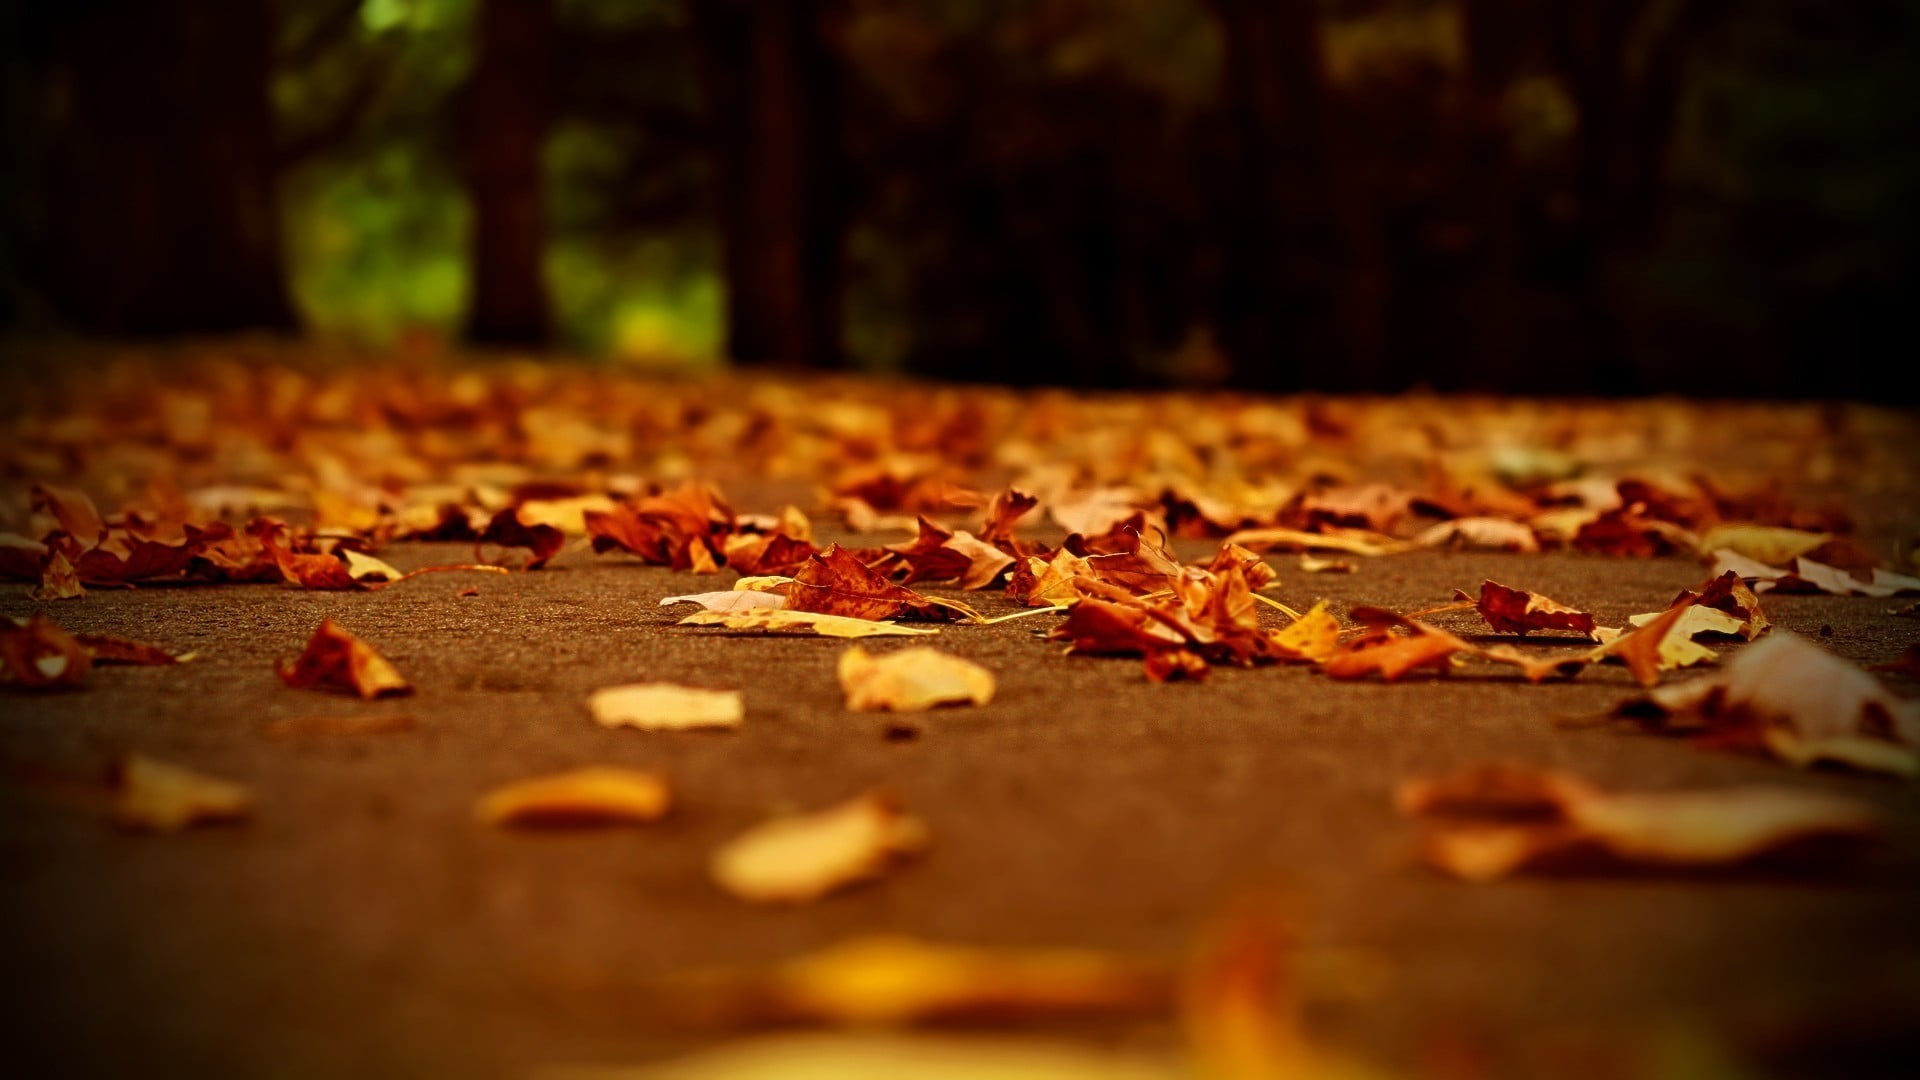 dry leaf, depth of field, leaves, fall, autumn, nature, forest